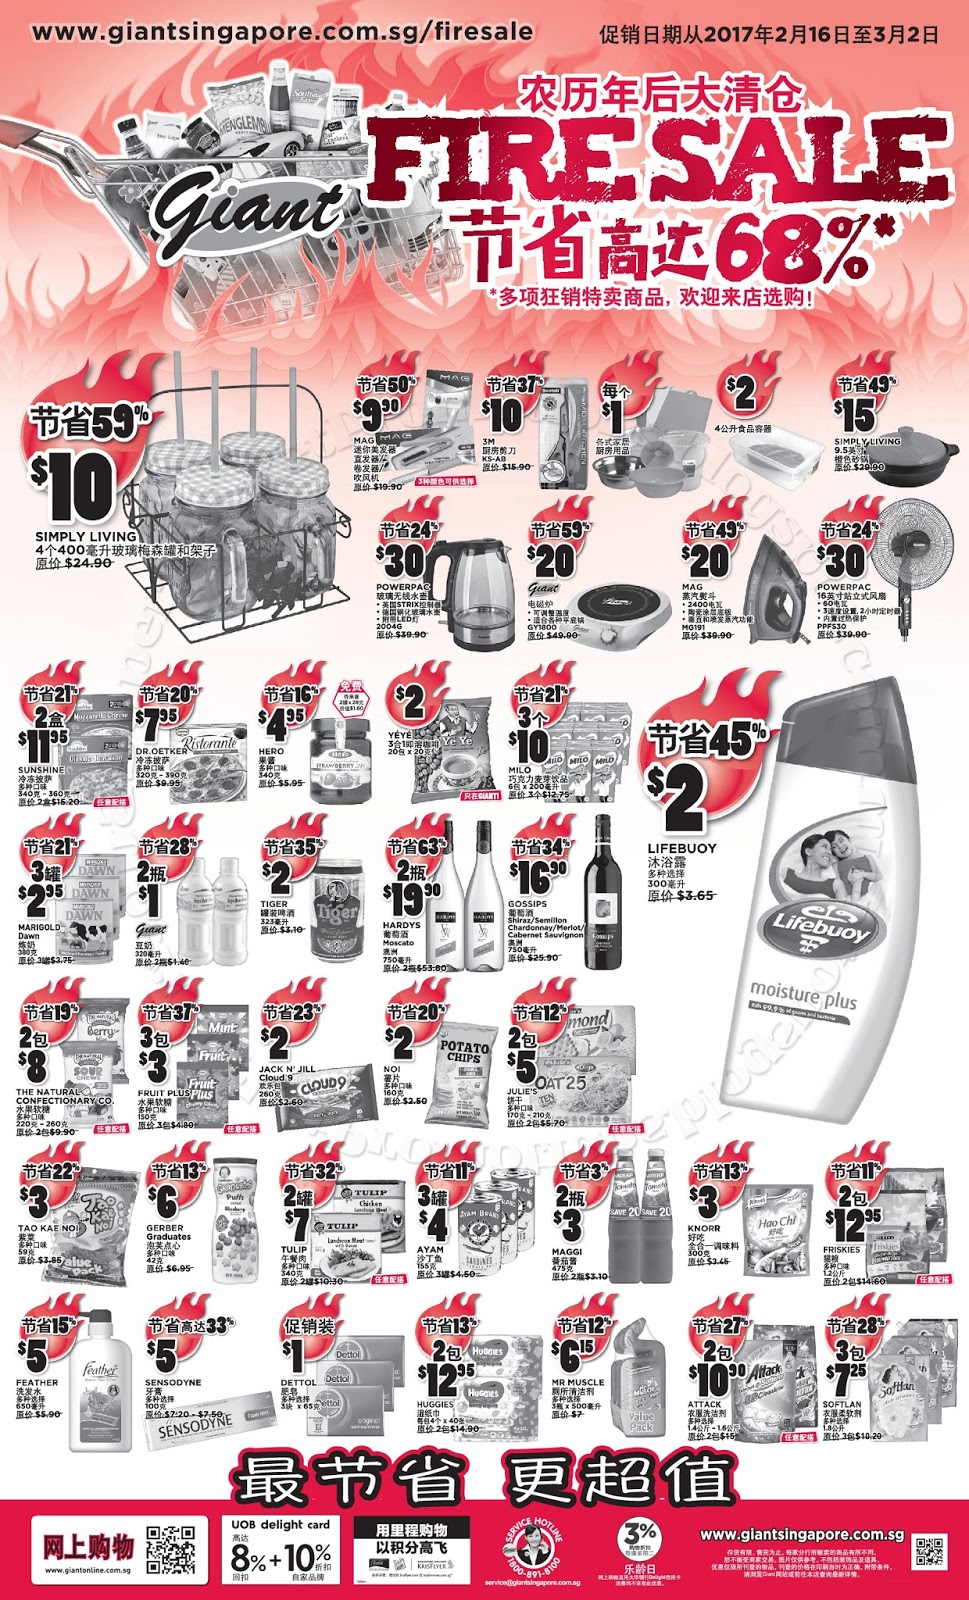 Giant Fire Sale 16 February - 02 March 2017 ~ Supermarket ...